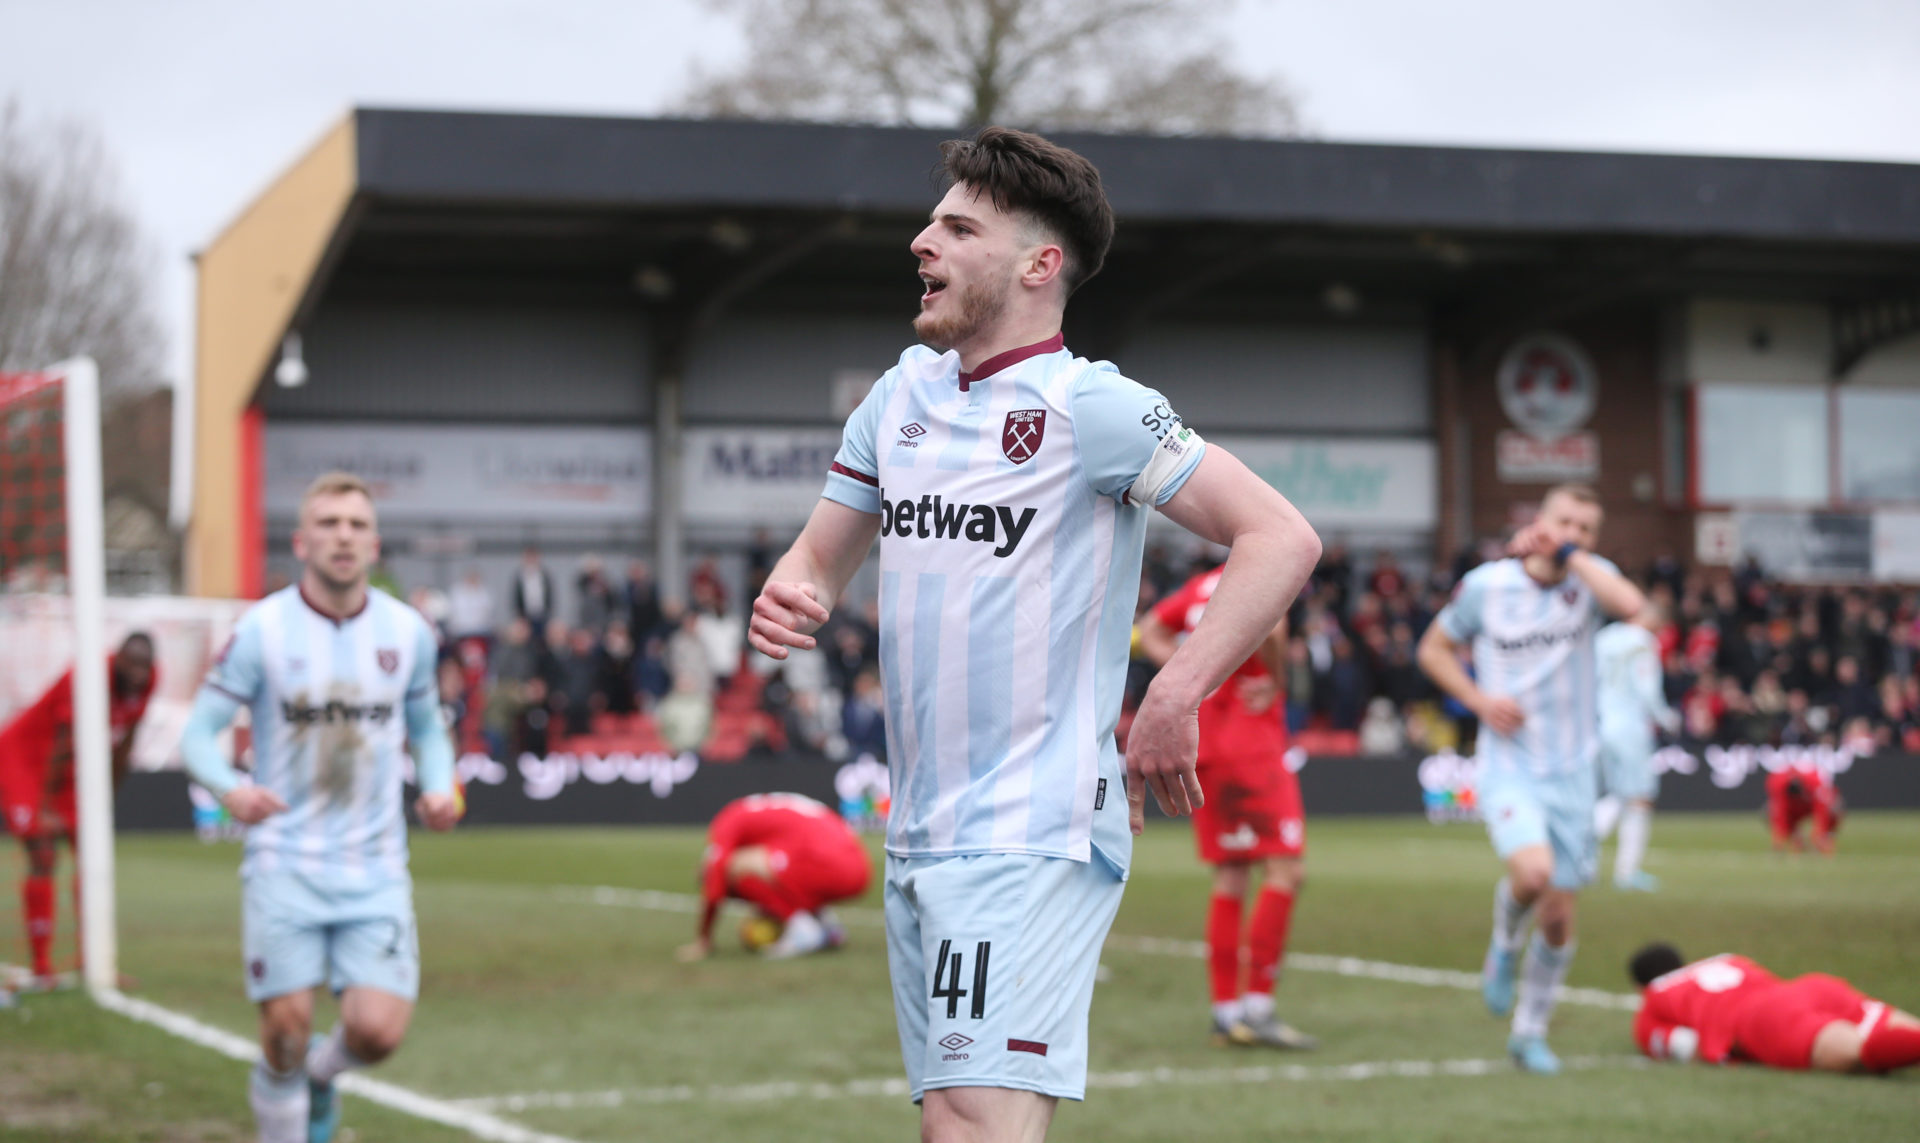 Kidderminster Harriers v West Ham United: The Emirates FA Cup Fourth Round